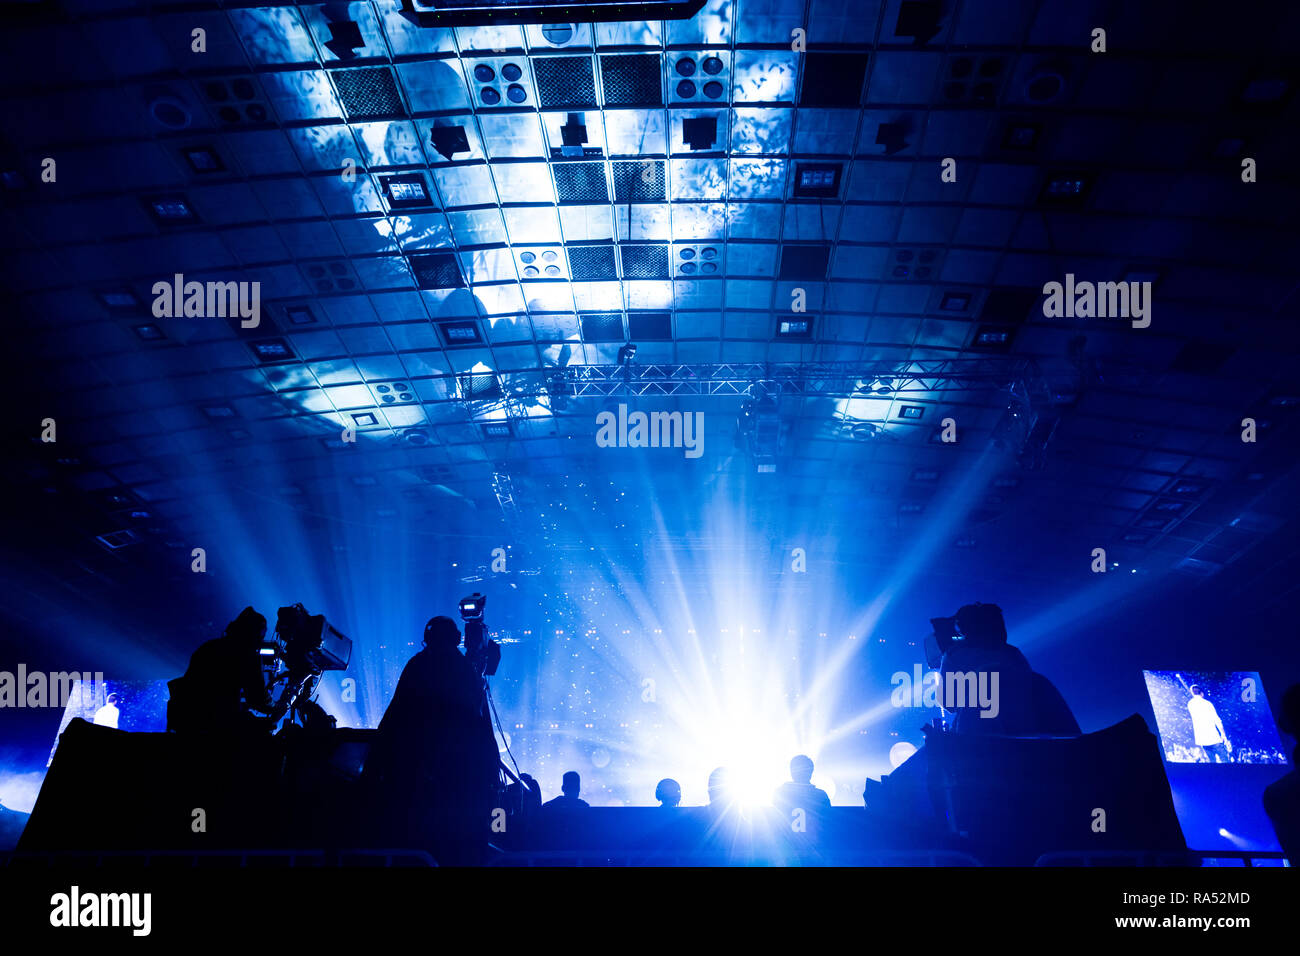 A group of cameramen working during the concert. Stock Photo